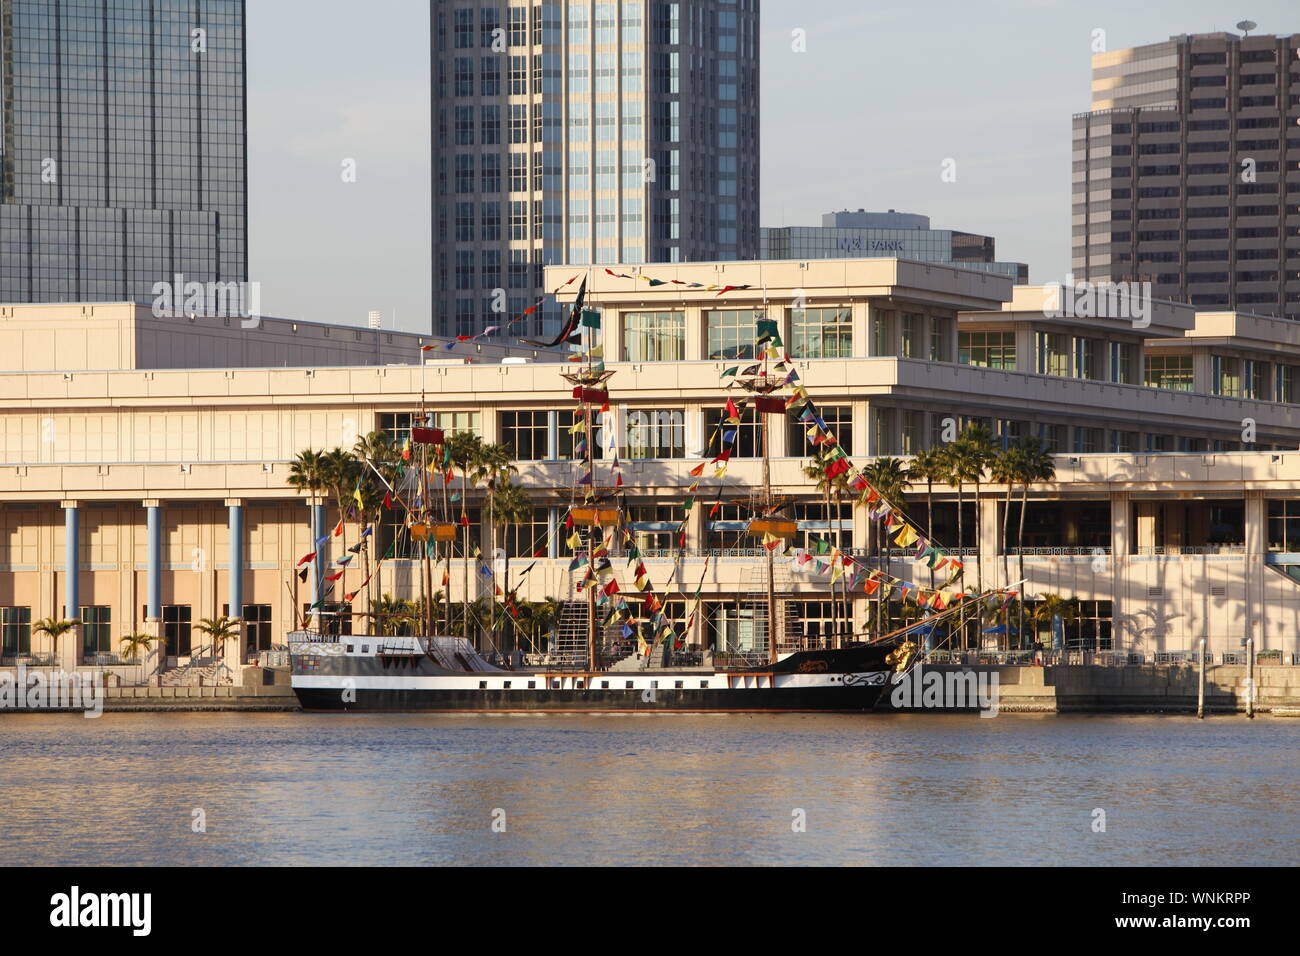 Gasparilla pirate ship is docked at the Tampa Convention Center in Downtown Tampa. Stock Photo